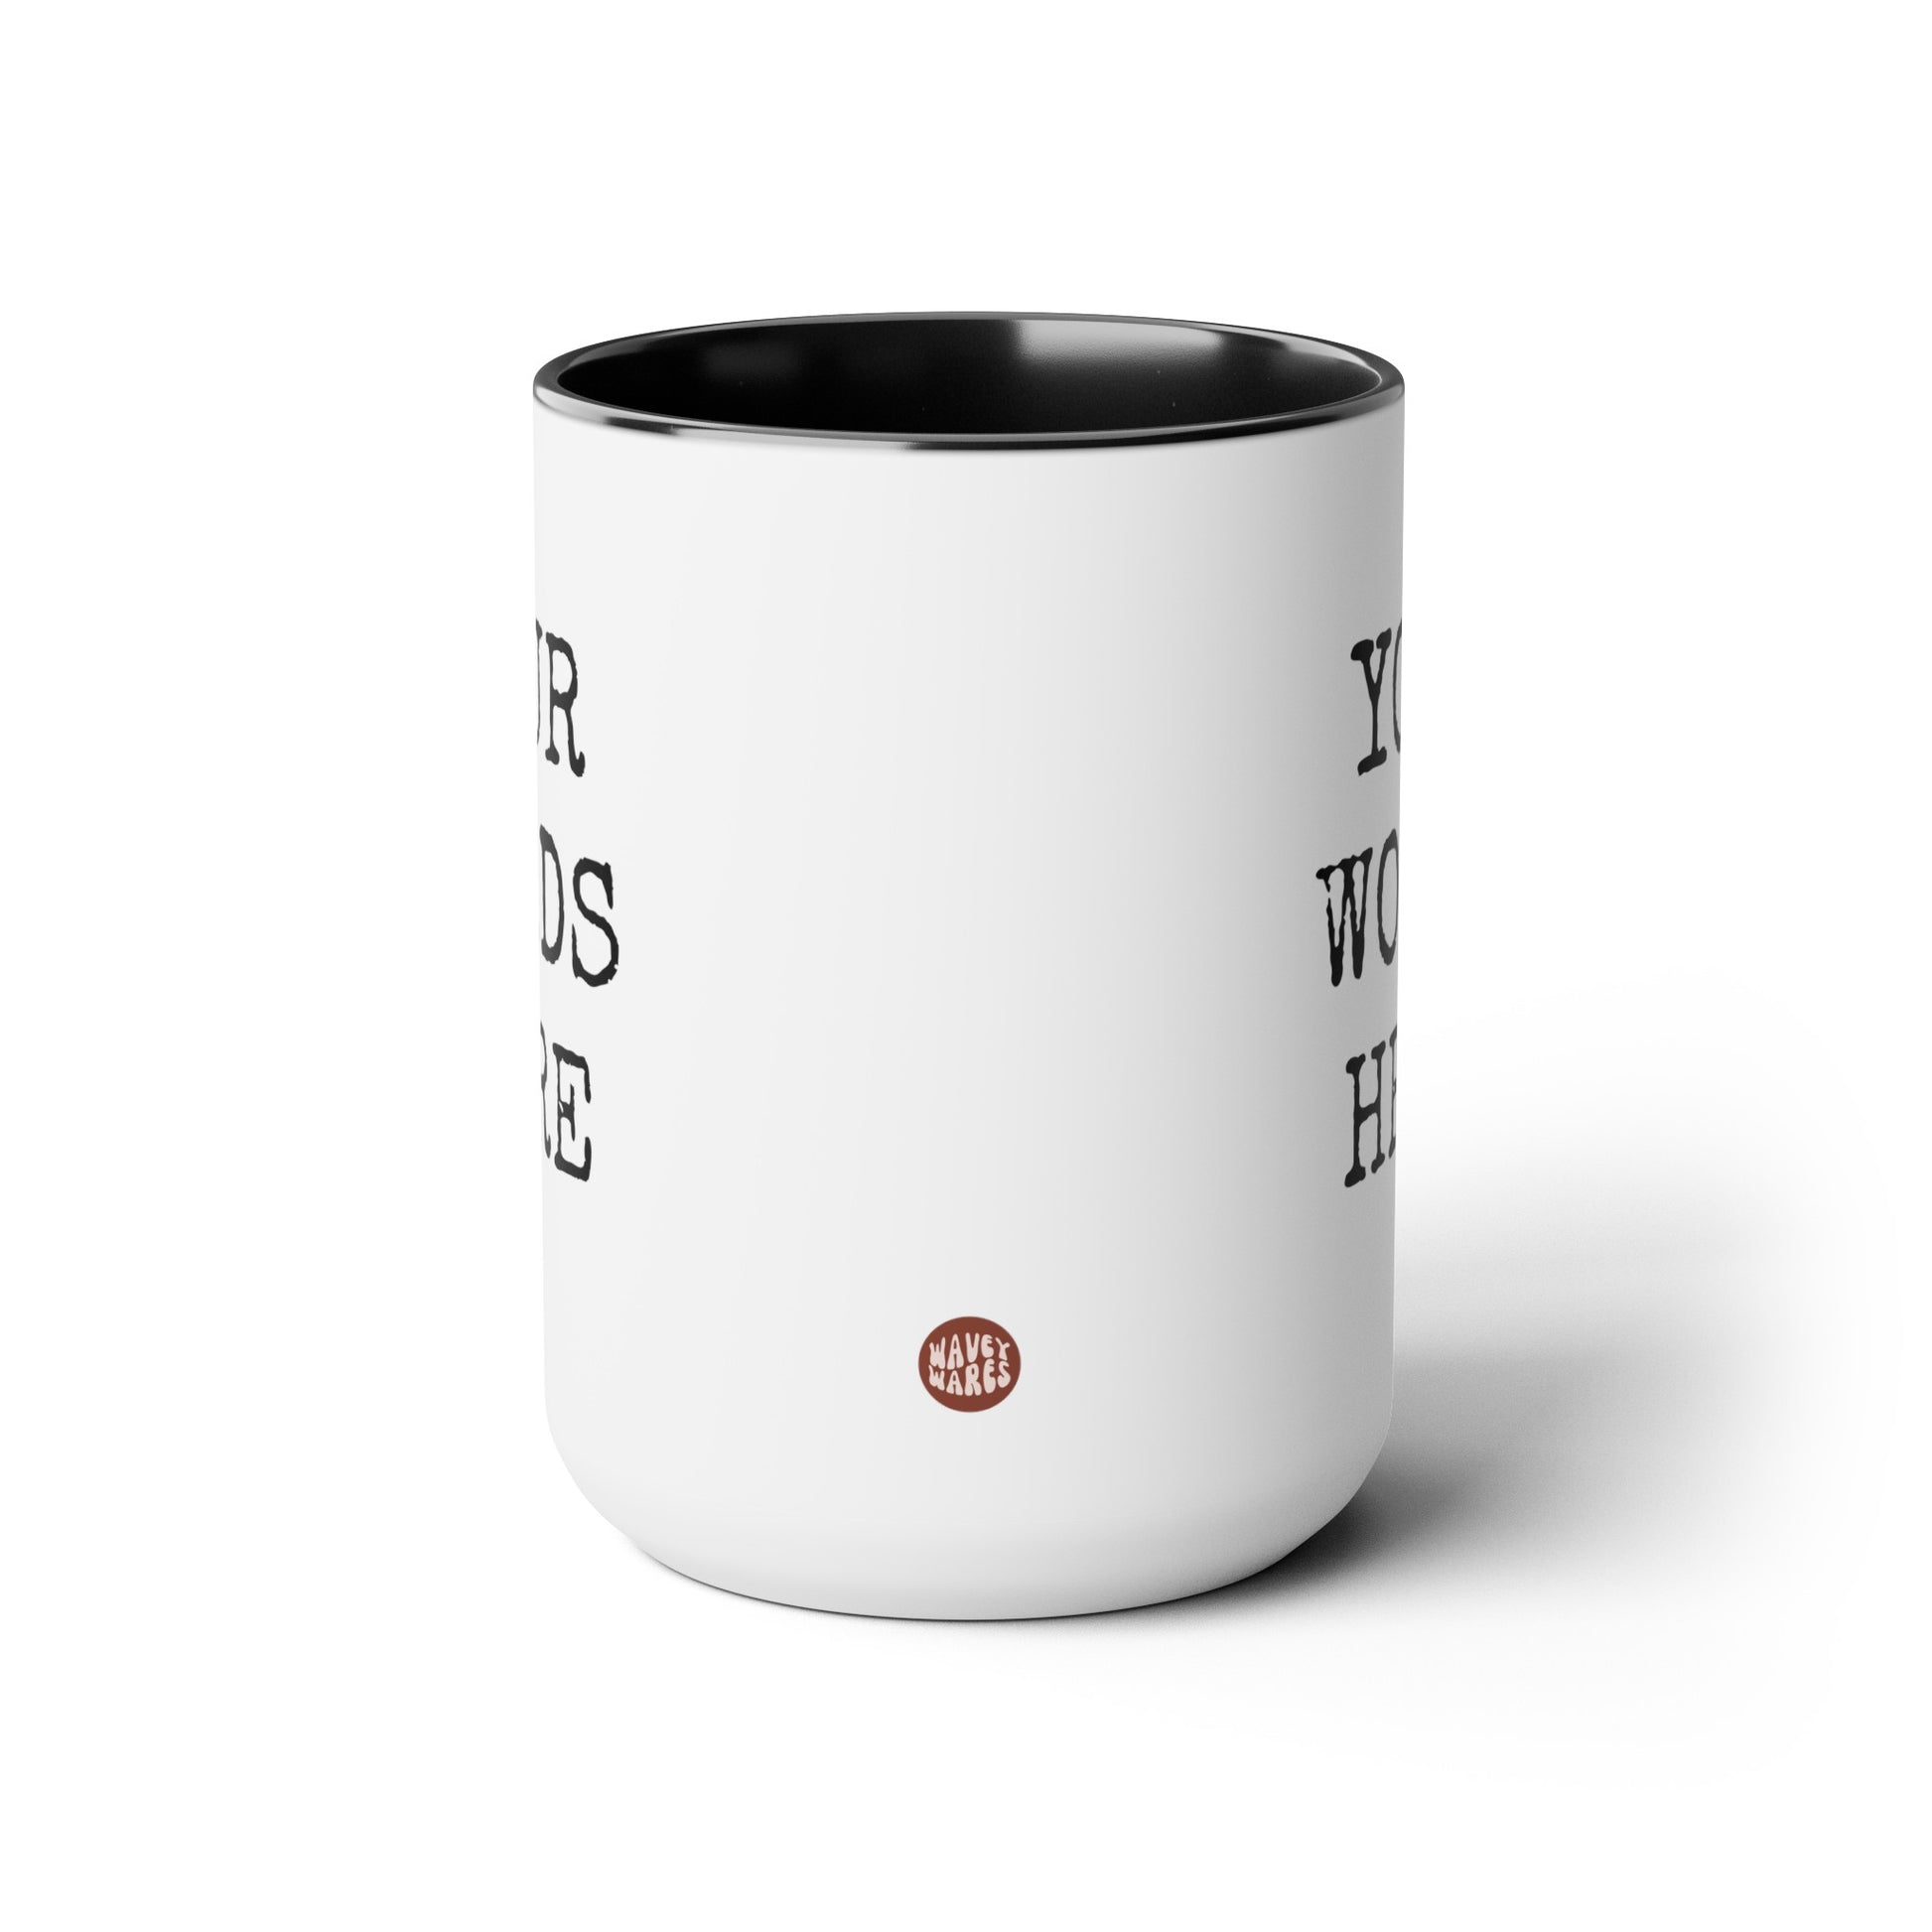 Create Your Own Words Here 15oz white with with black accent large big funny coffee mug tea cup gift for friend family custom customized text personalized font waveywares wavey wares wavywares wavy wares side